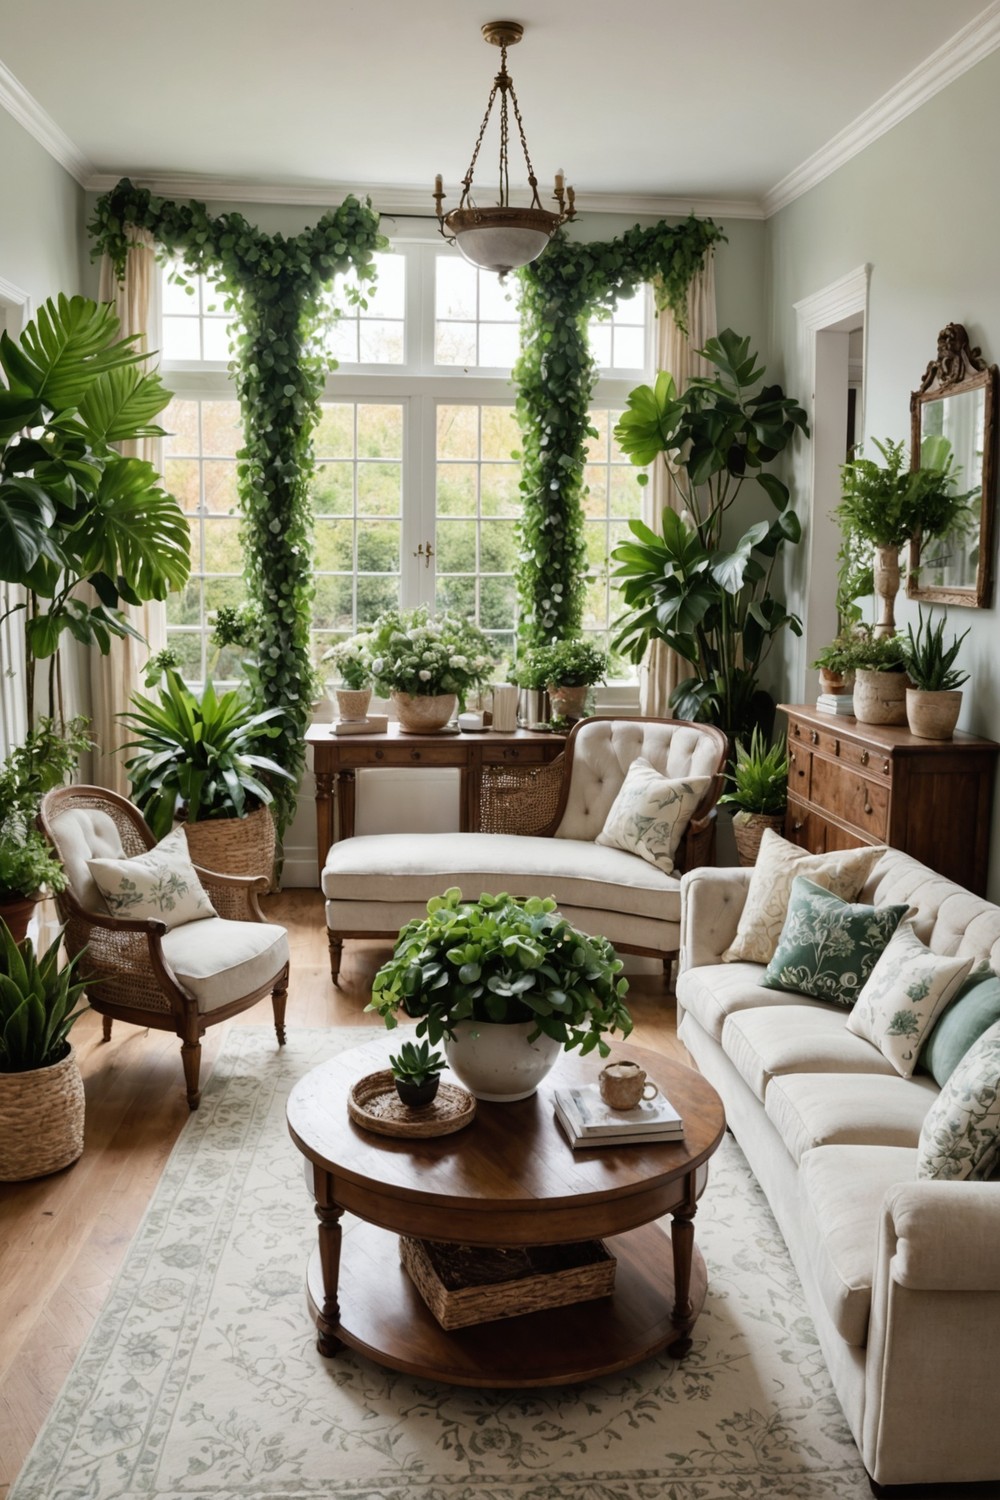 Bring the Outdoors In: Lush Greenery and Florals in Your Decor